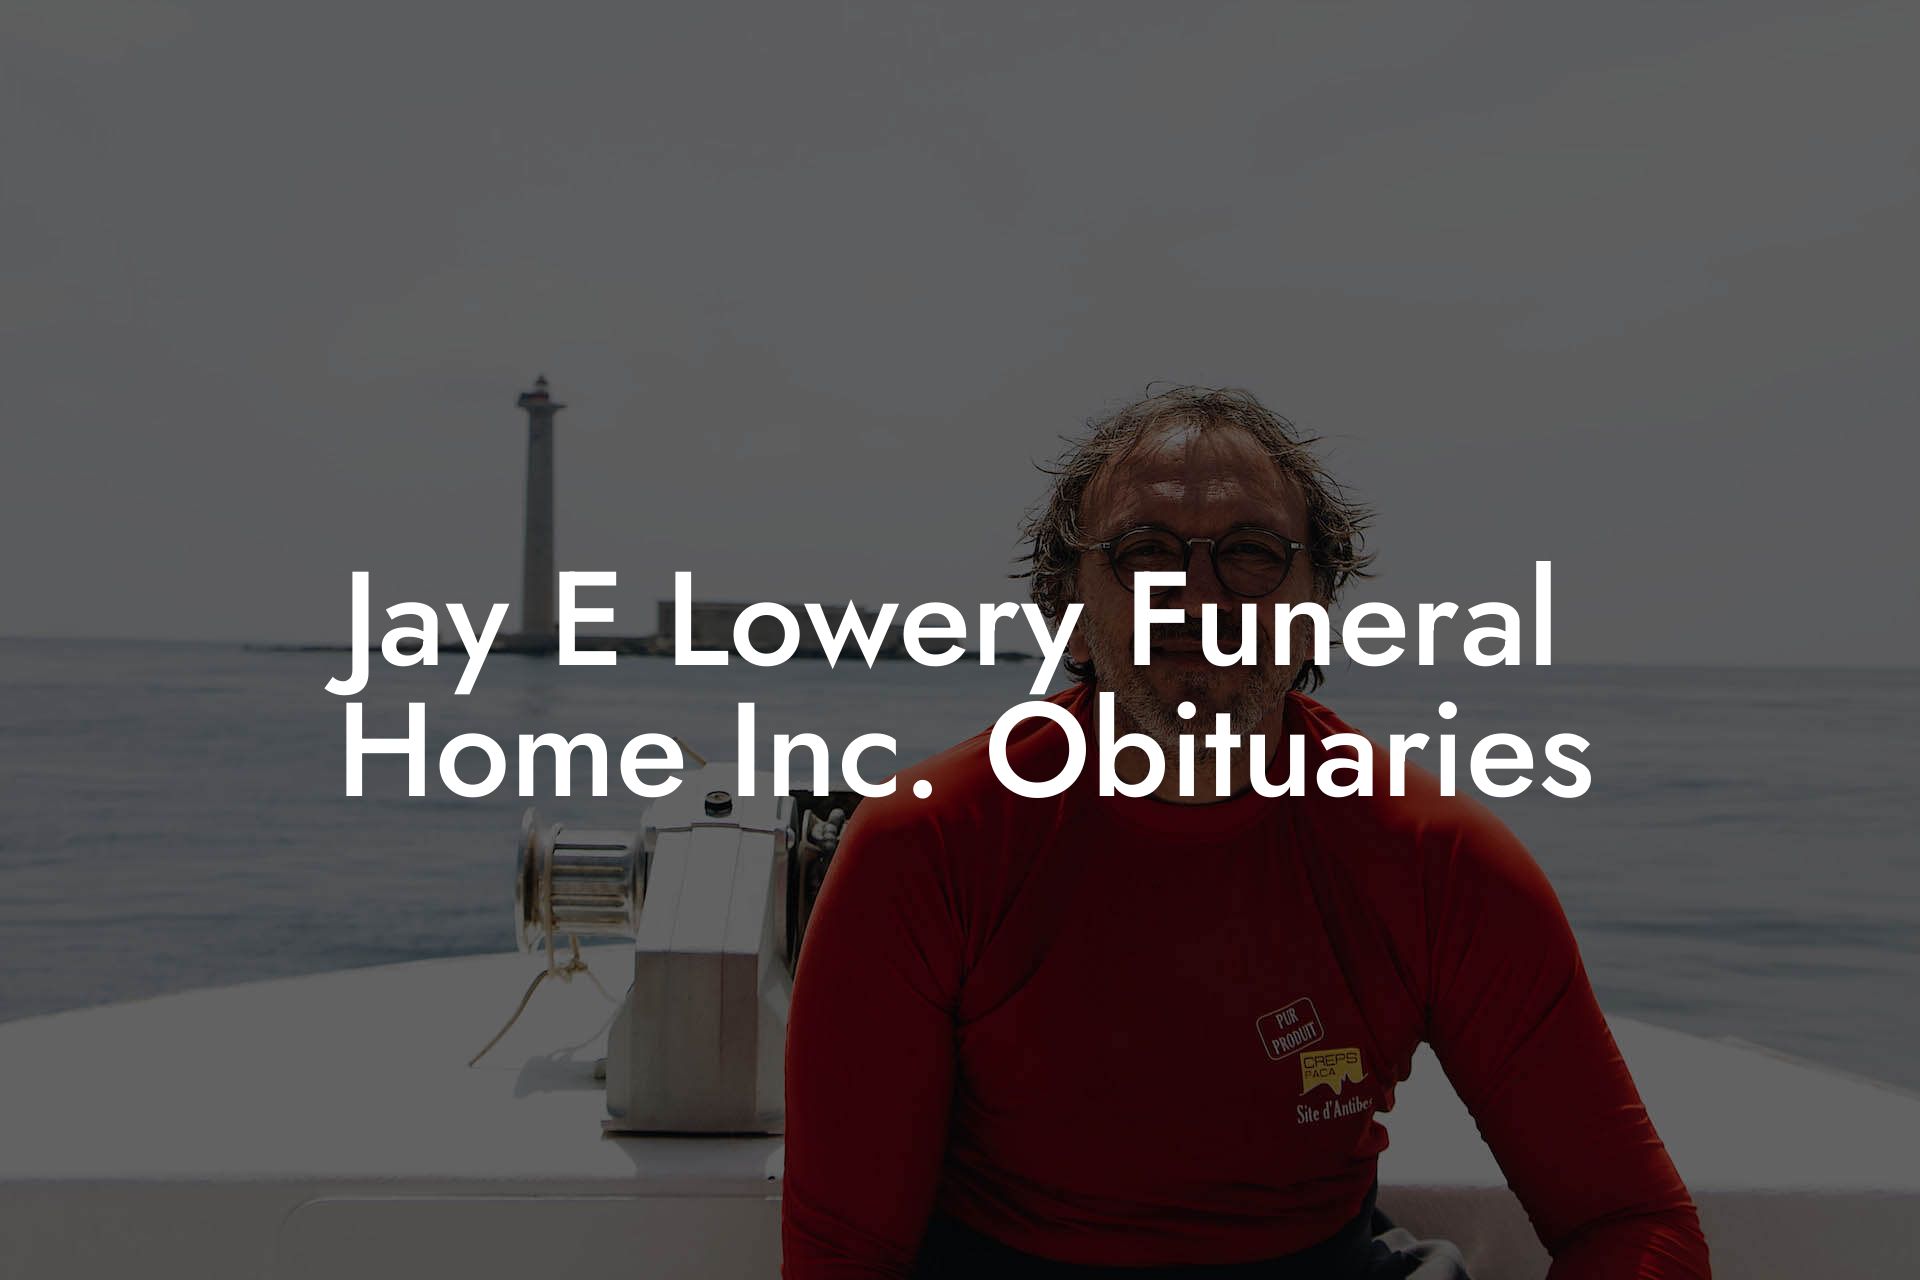 Jay E Lowery Funeral Home Inc. Obituaries